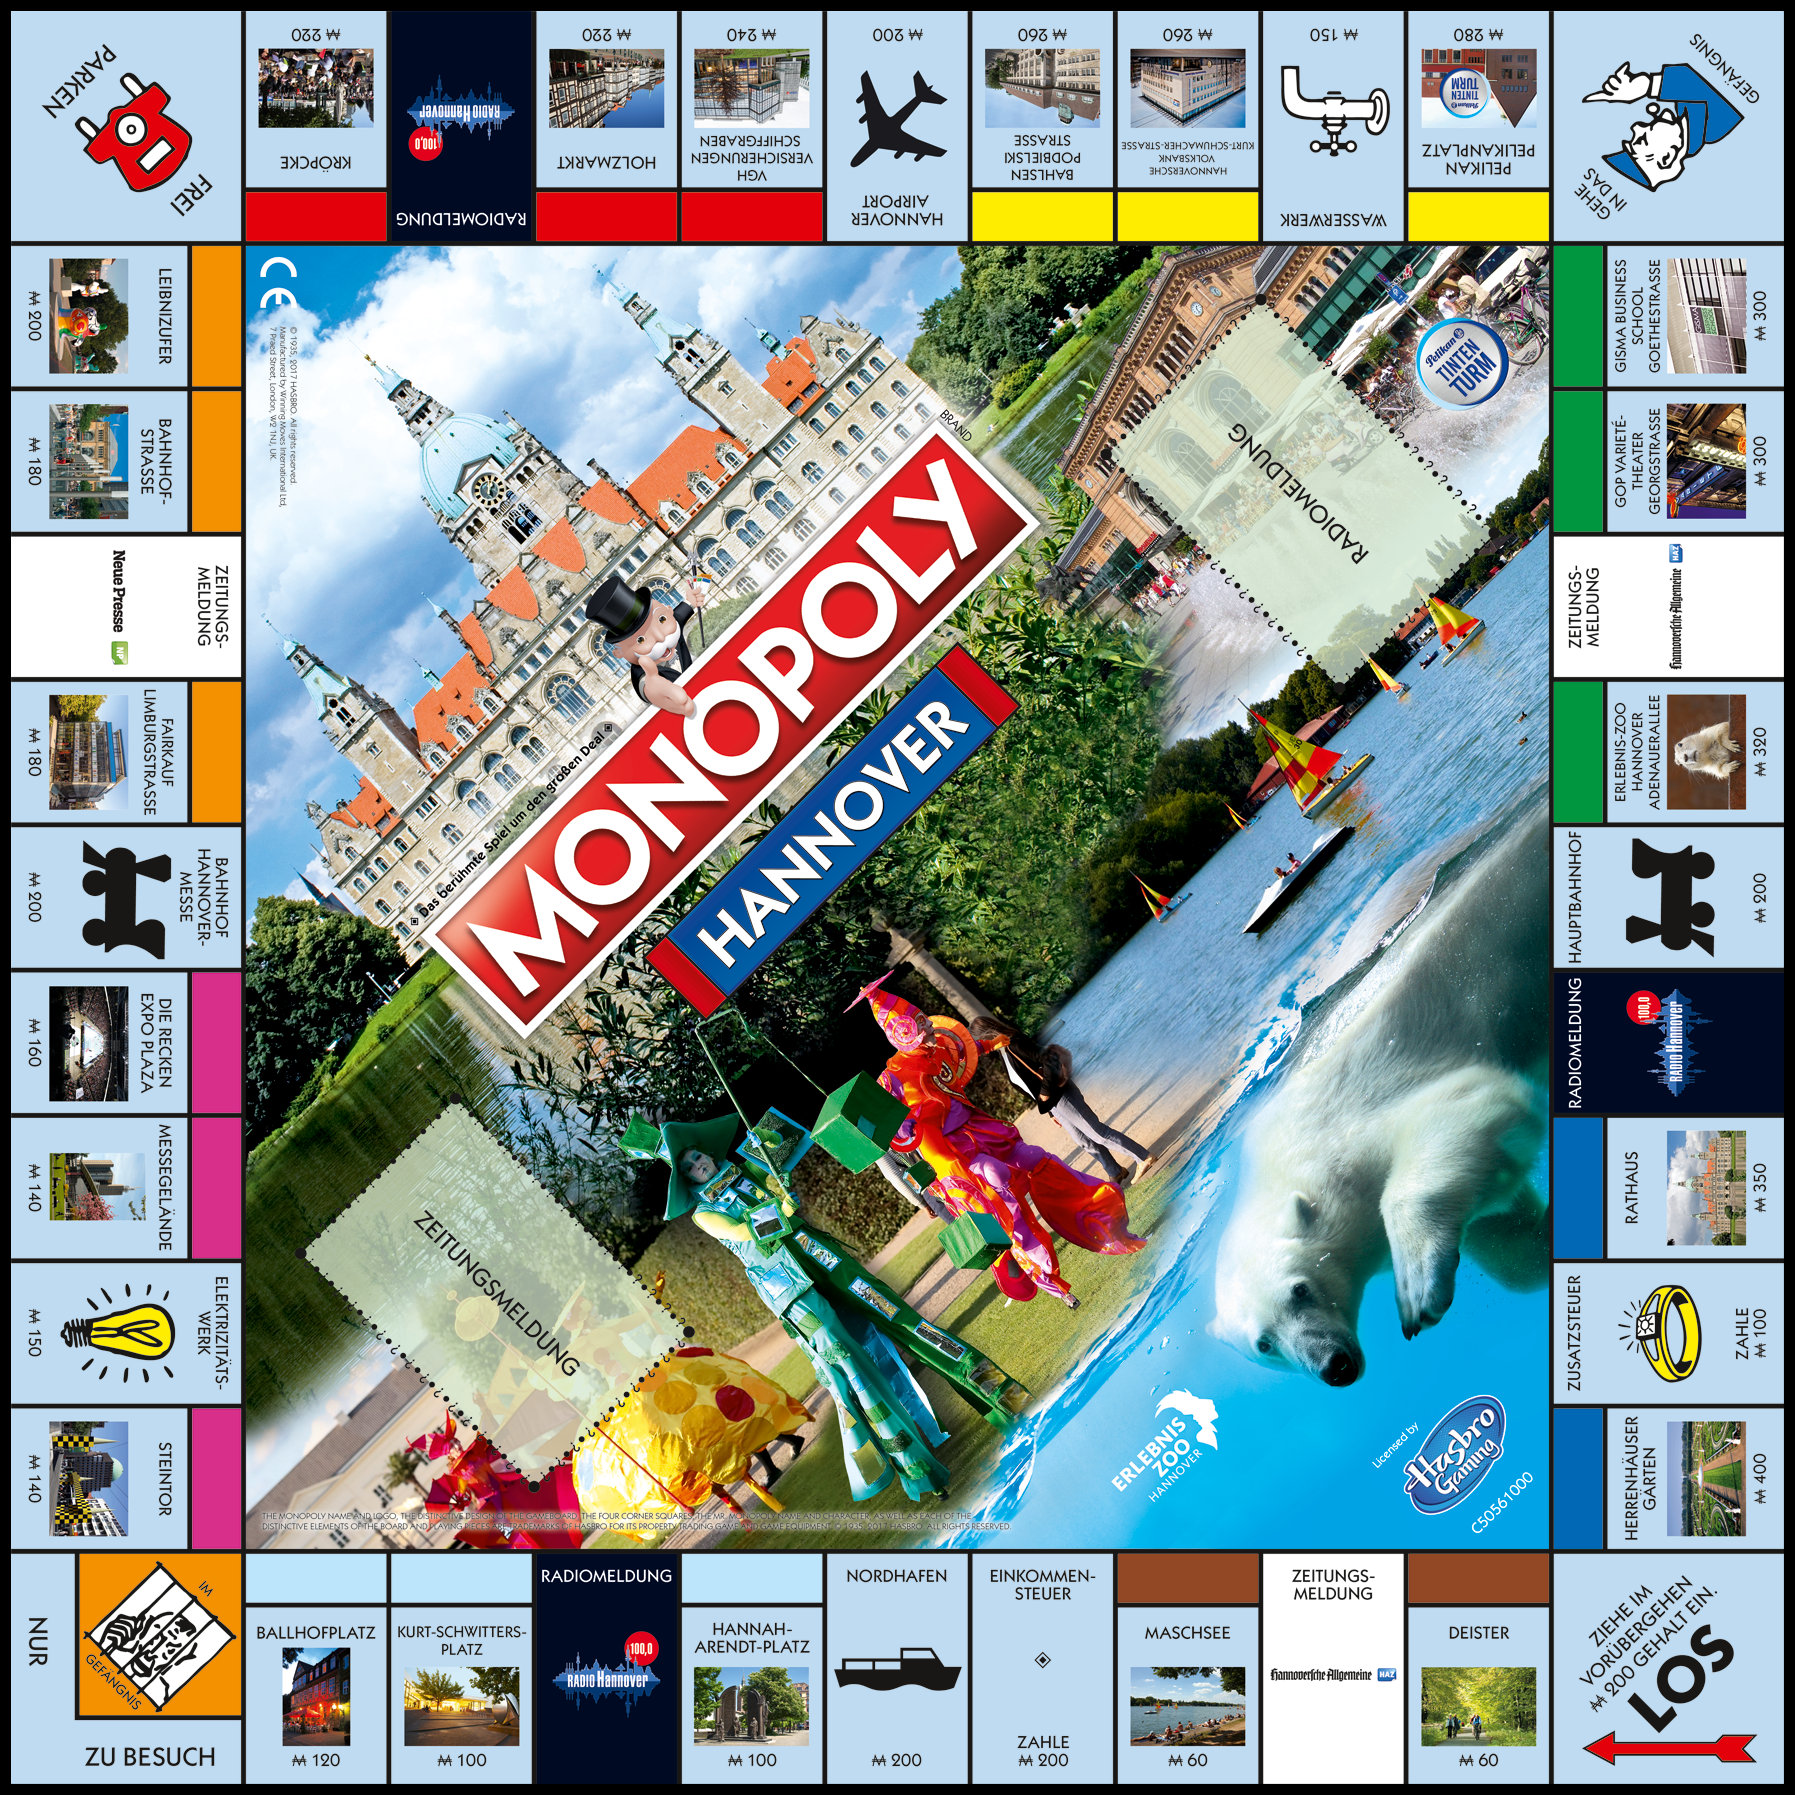 Monopoly Hannover